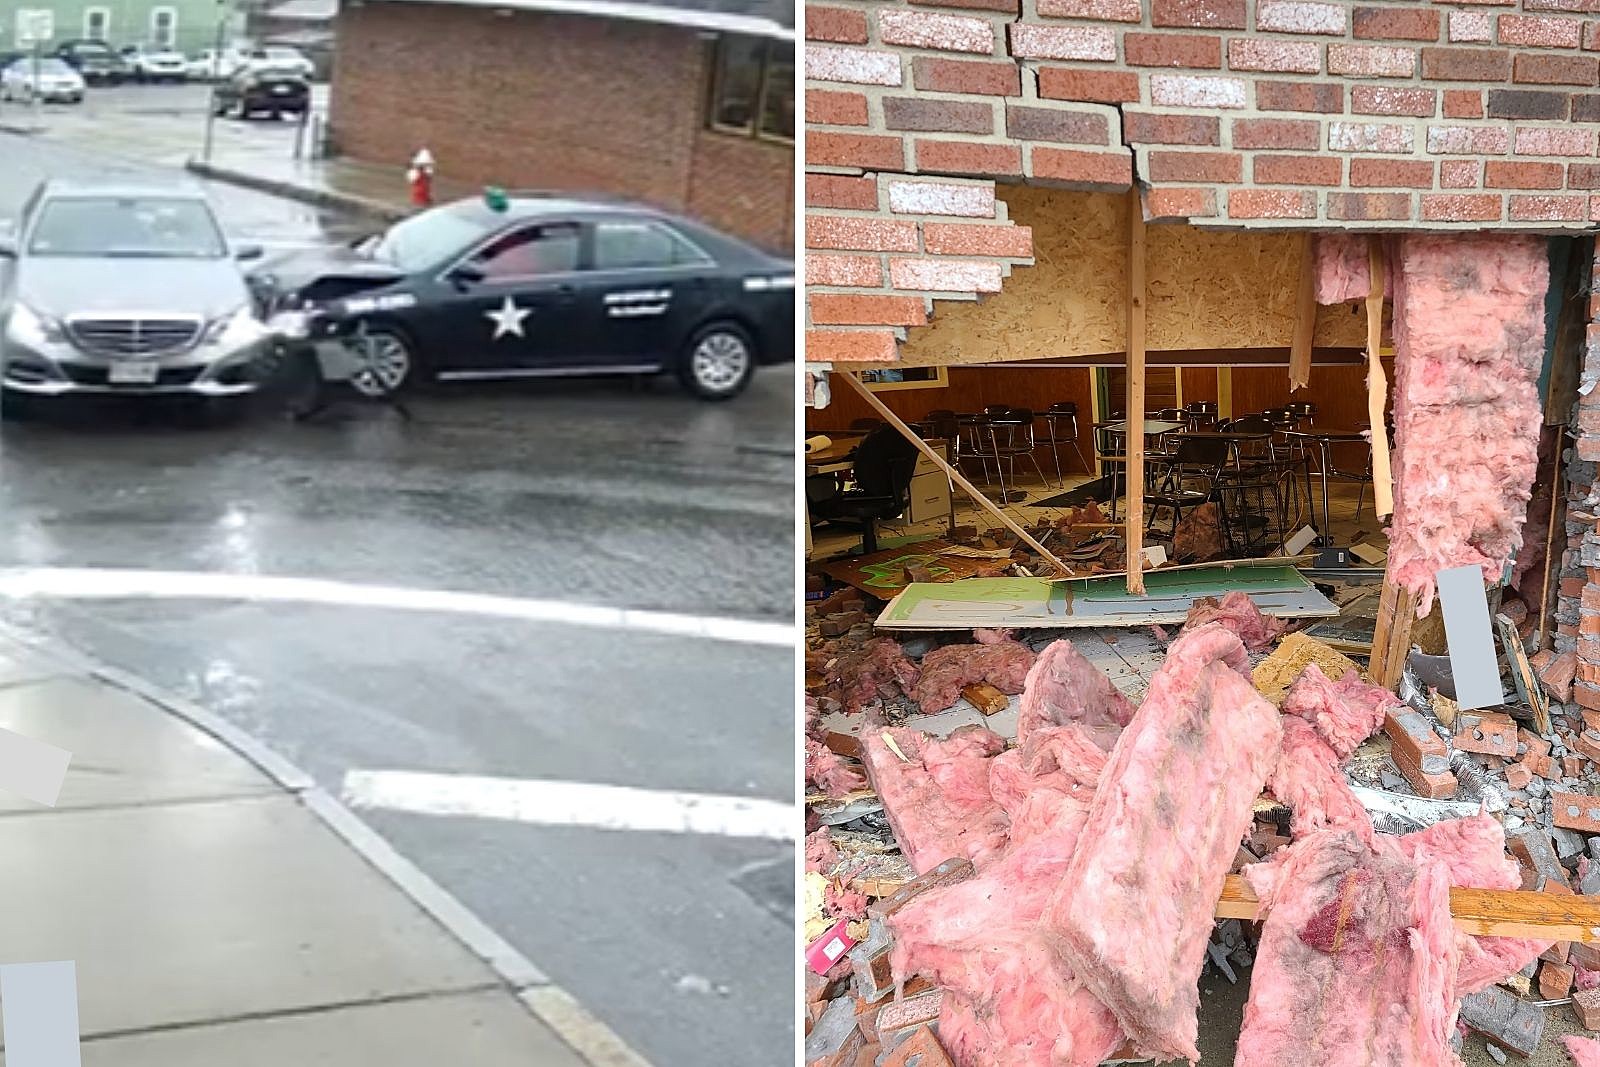 New Hire at Driving School Crashes Car into 'Learn to Drive' Facility